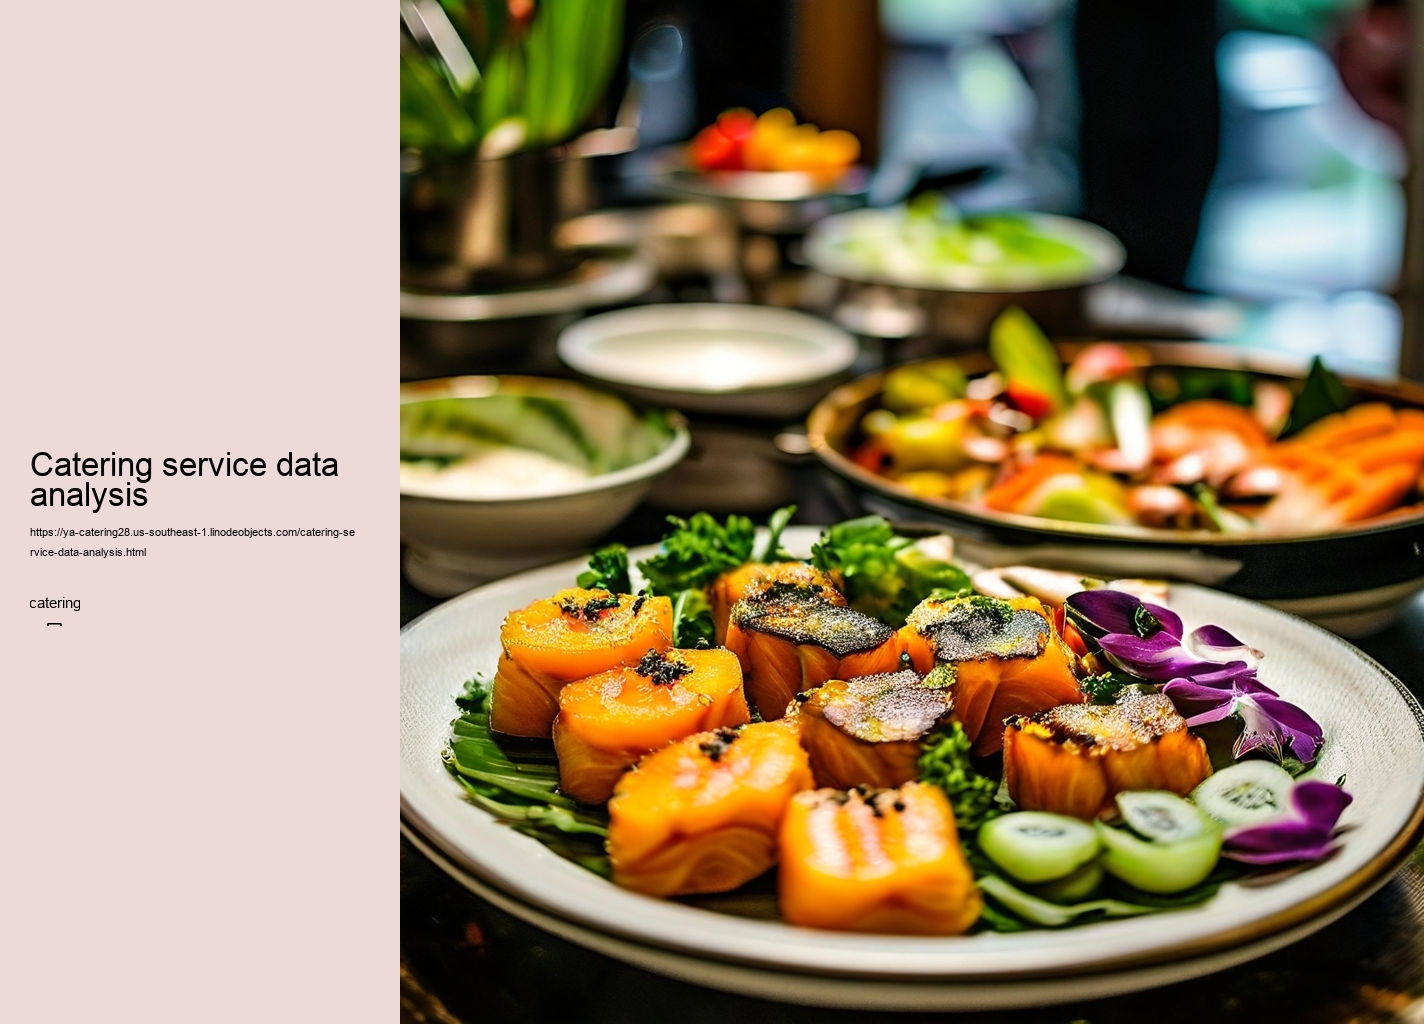 Catering service data analysis